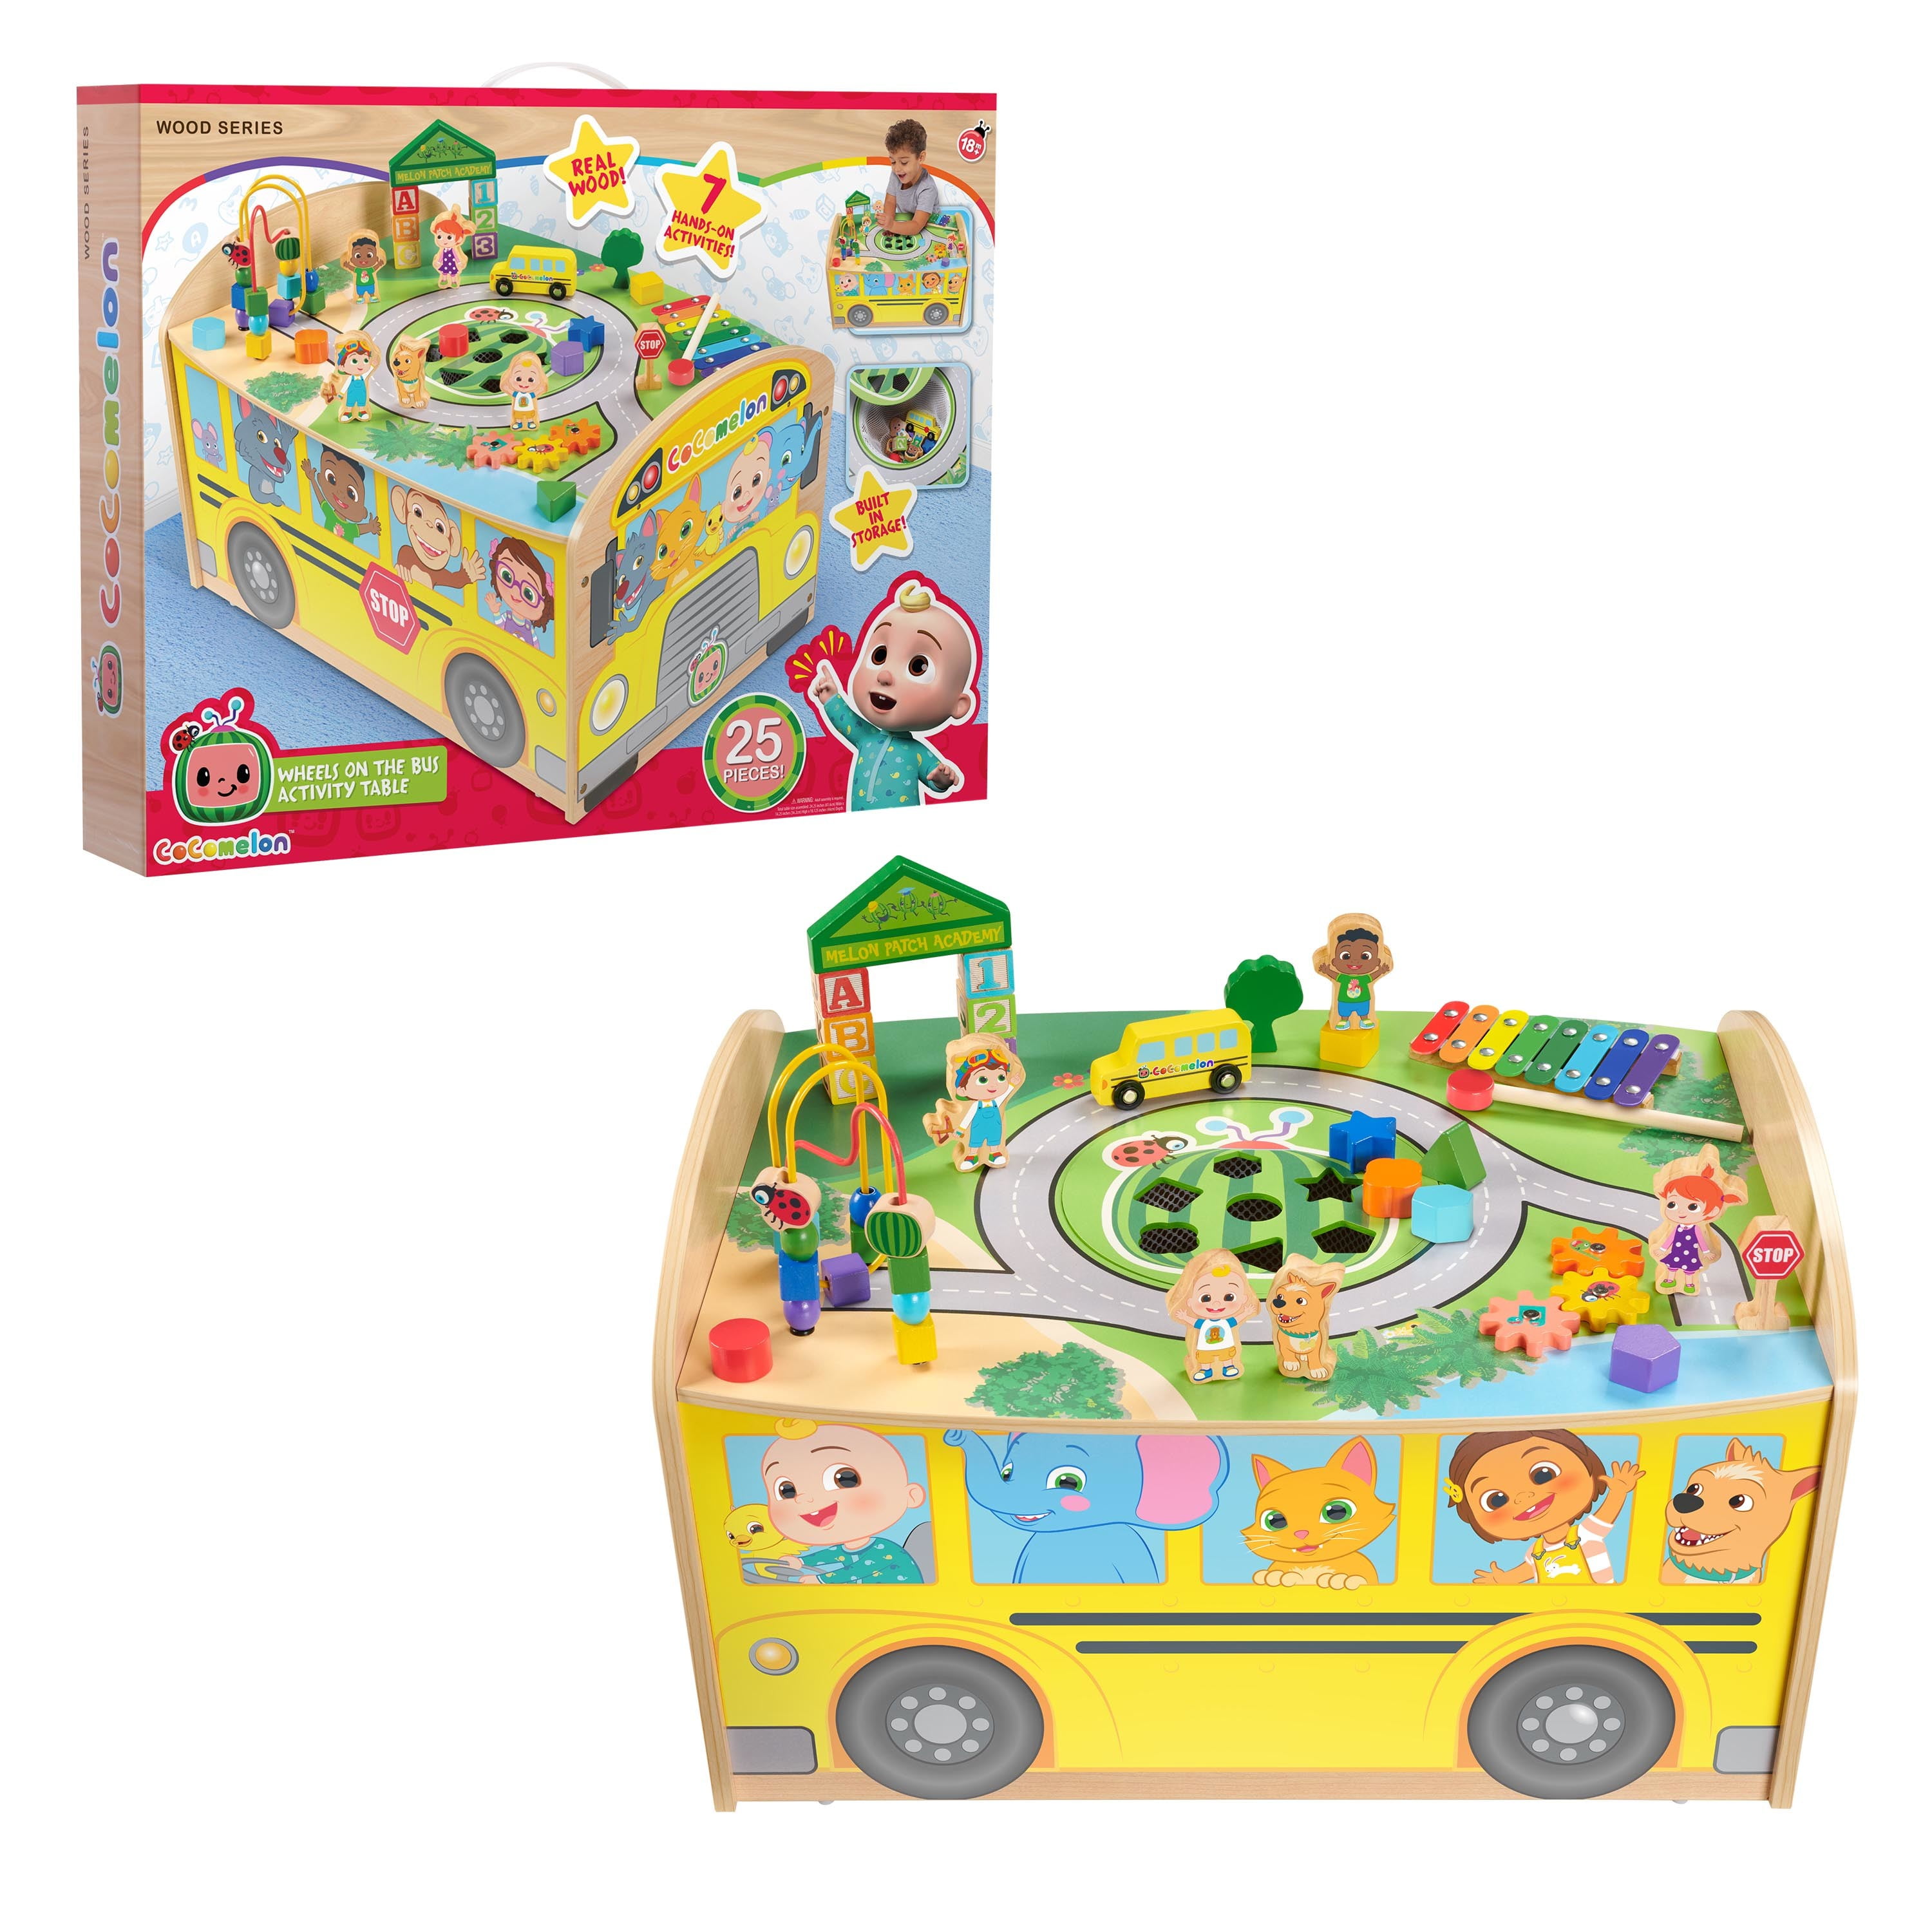 CoComelon Wheels on the Bus Wooden Activity Table, Recycled Wood, Officially Licensed Kids Toys for Ages 18 Month, Gifts and Presents